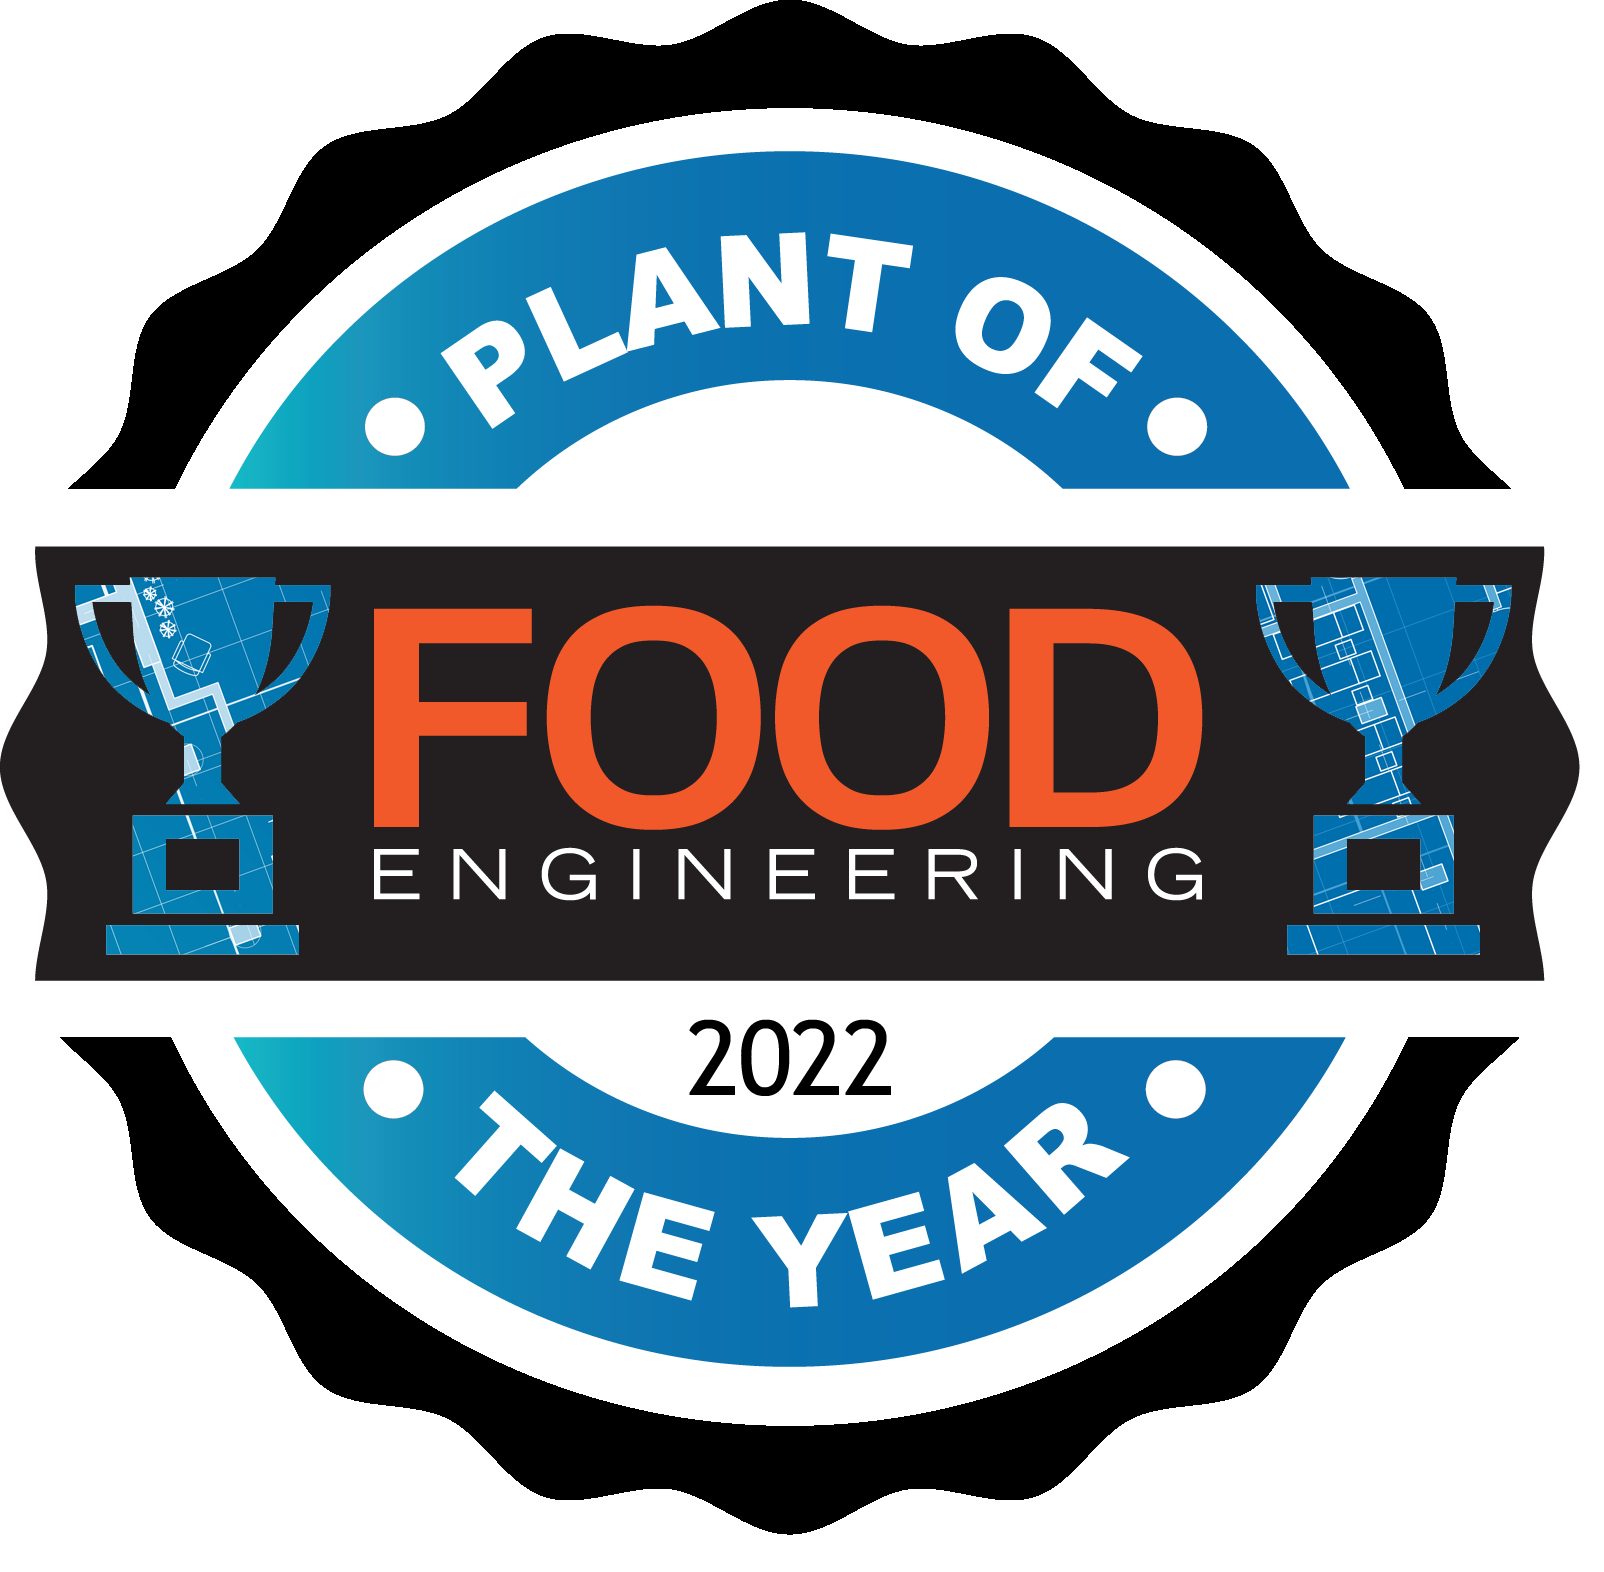 Plant of the Year badge